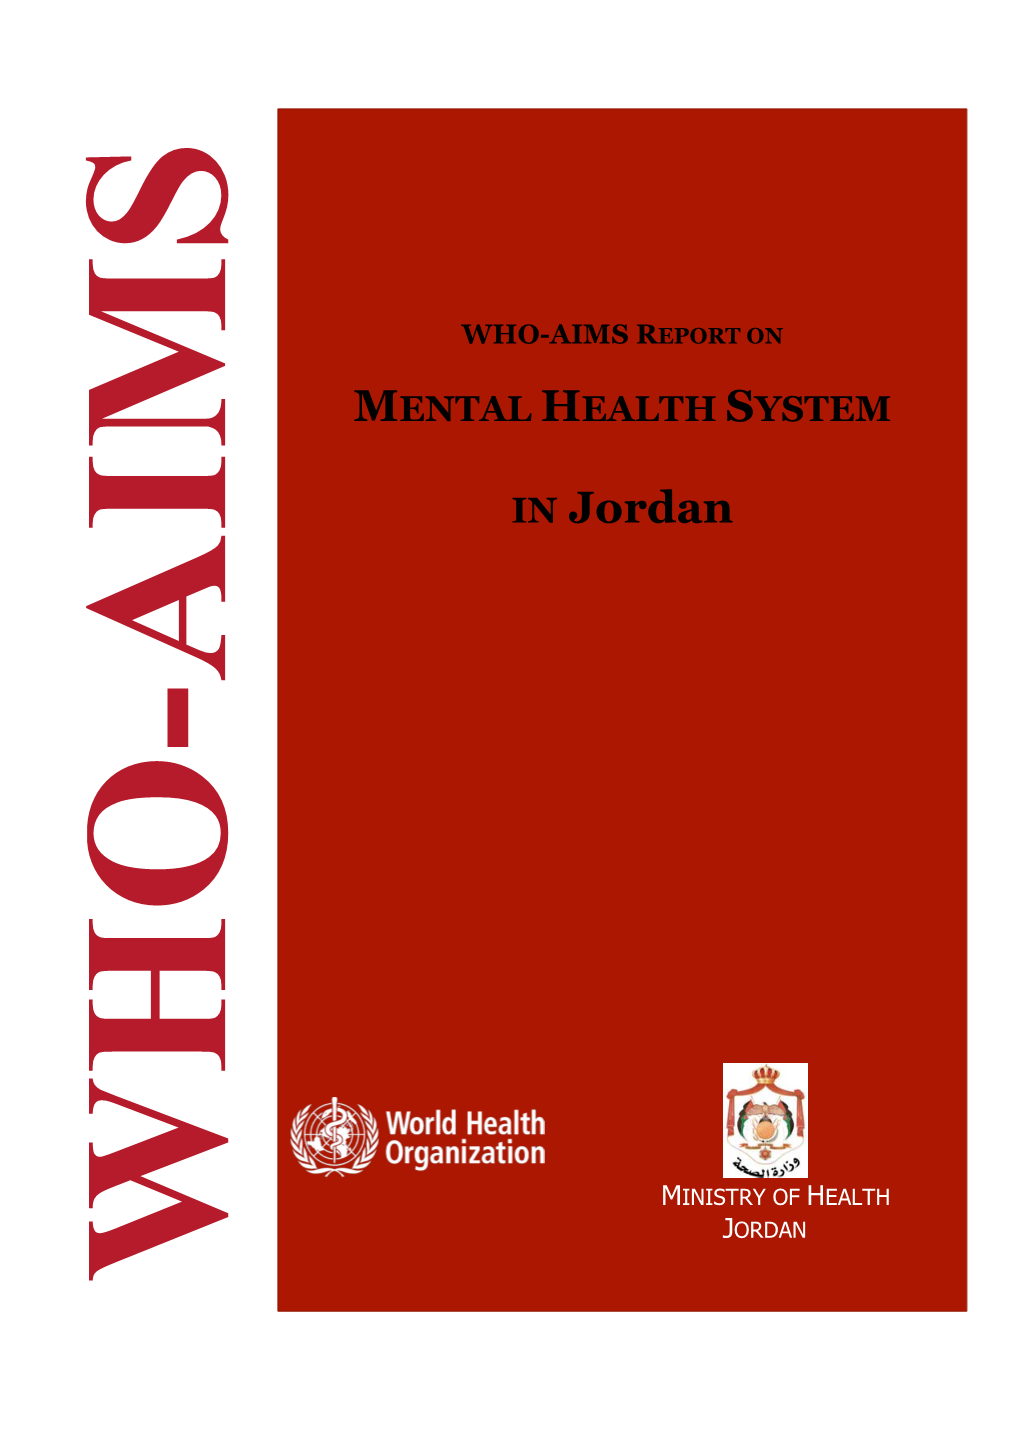 WHO-AIMS Report on Mental Health System in Jordan, WHO and Ministry of Health, Amman, Jordan, 2011